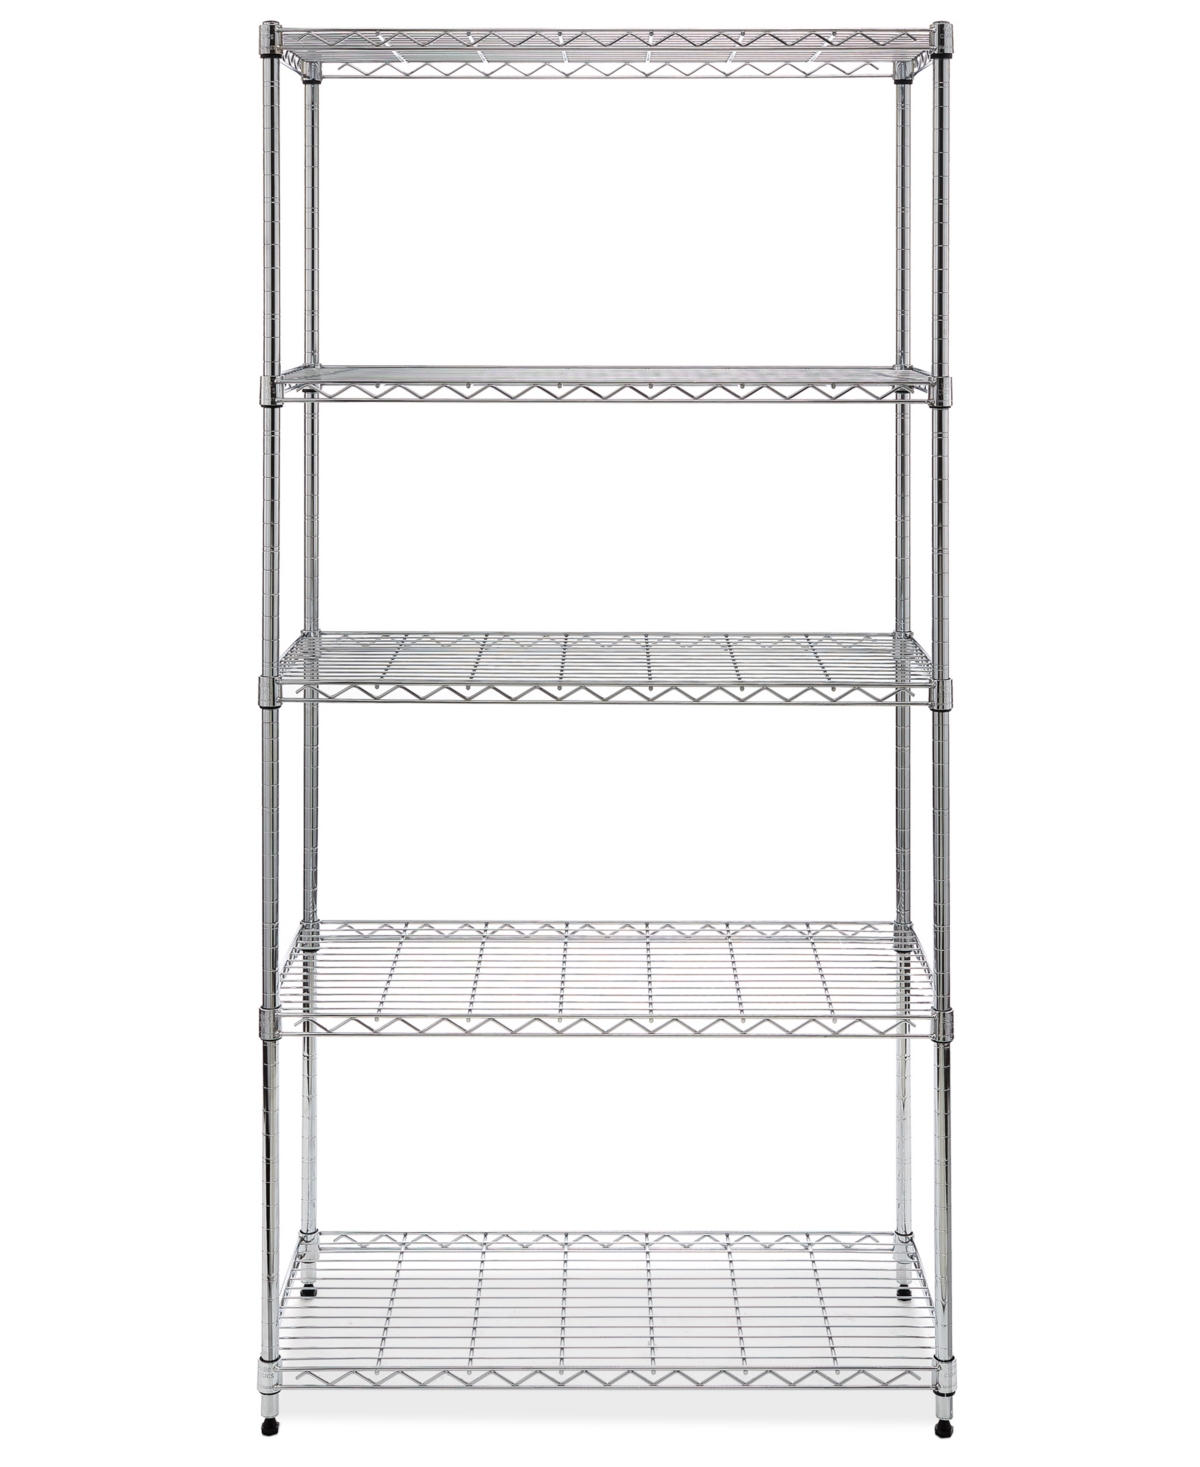 Seville Classics 5-tier Steel Wire Wheeled Shelving In Chrome